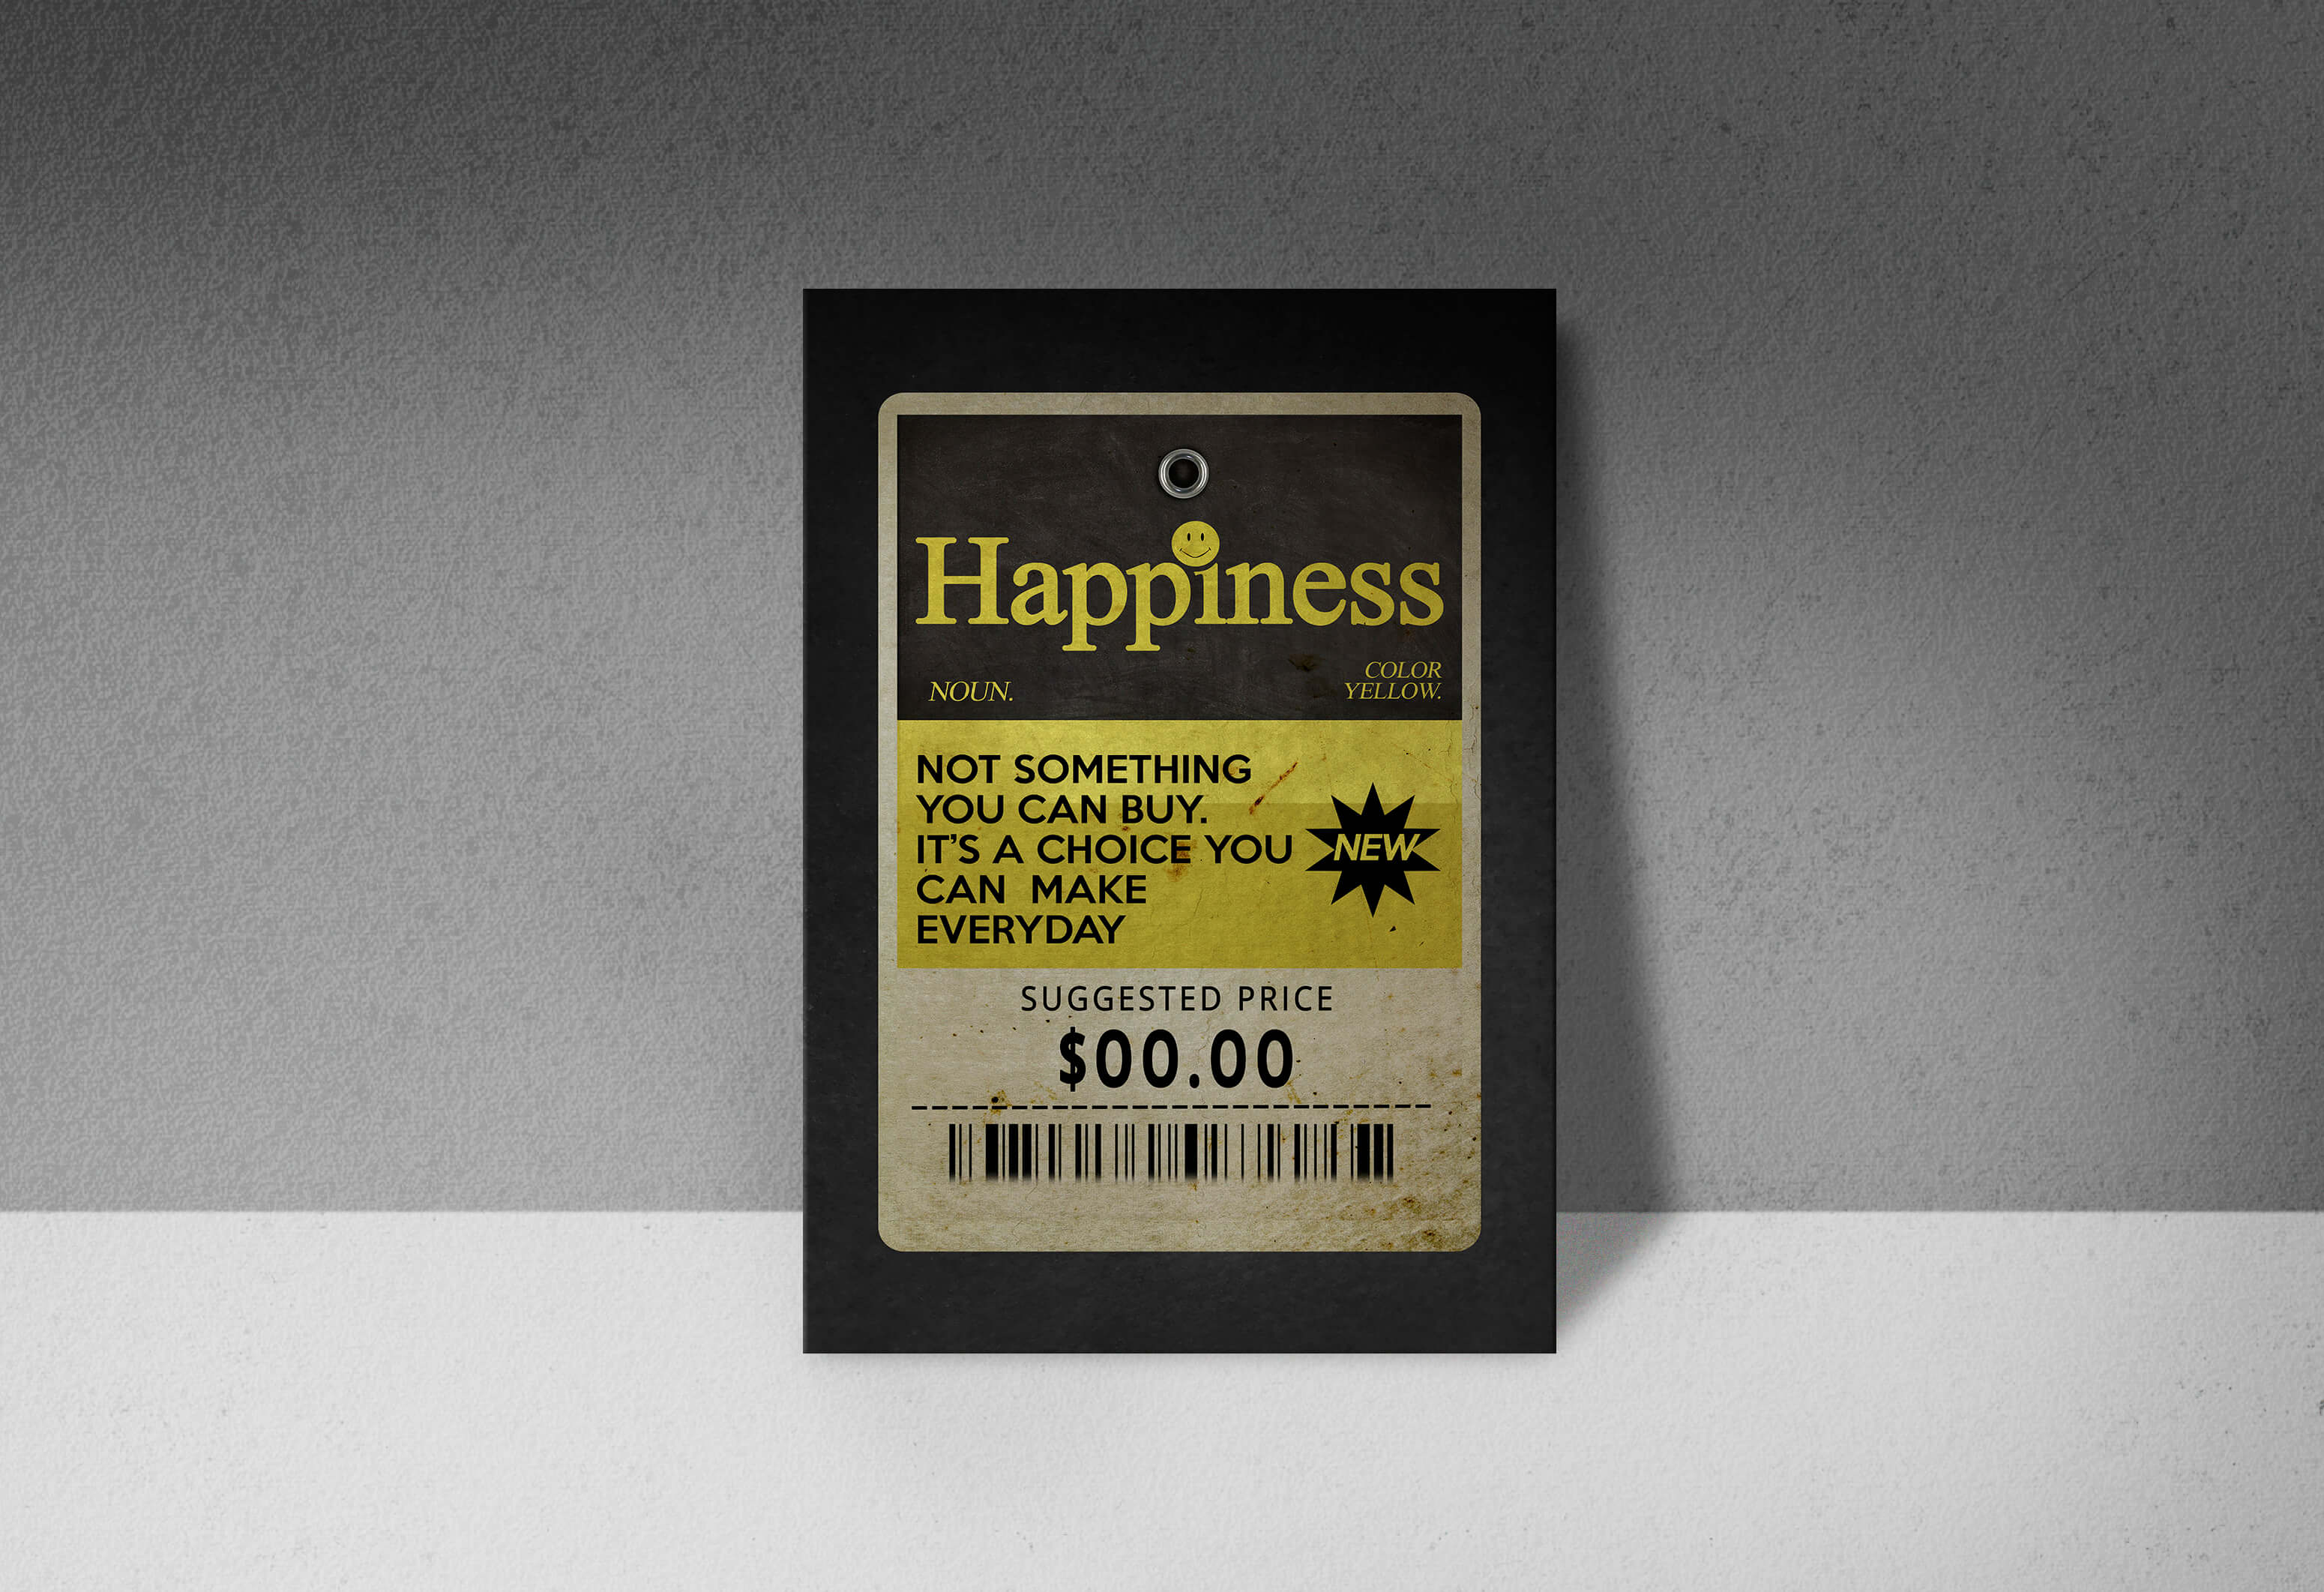 M1_HAPPINESS not somethin you can buy AOA8068